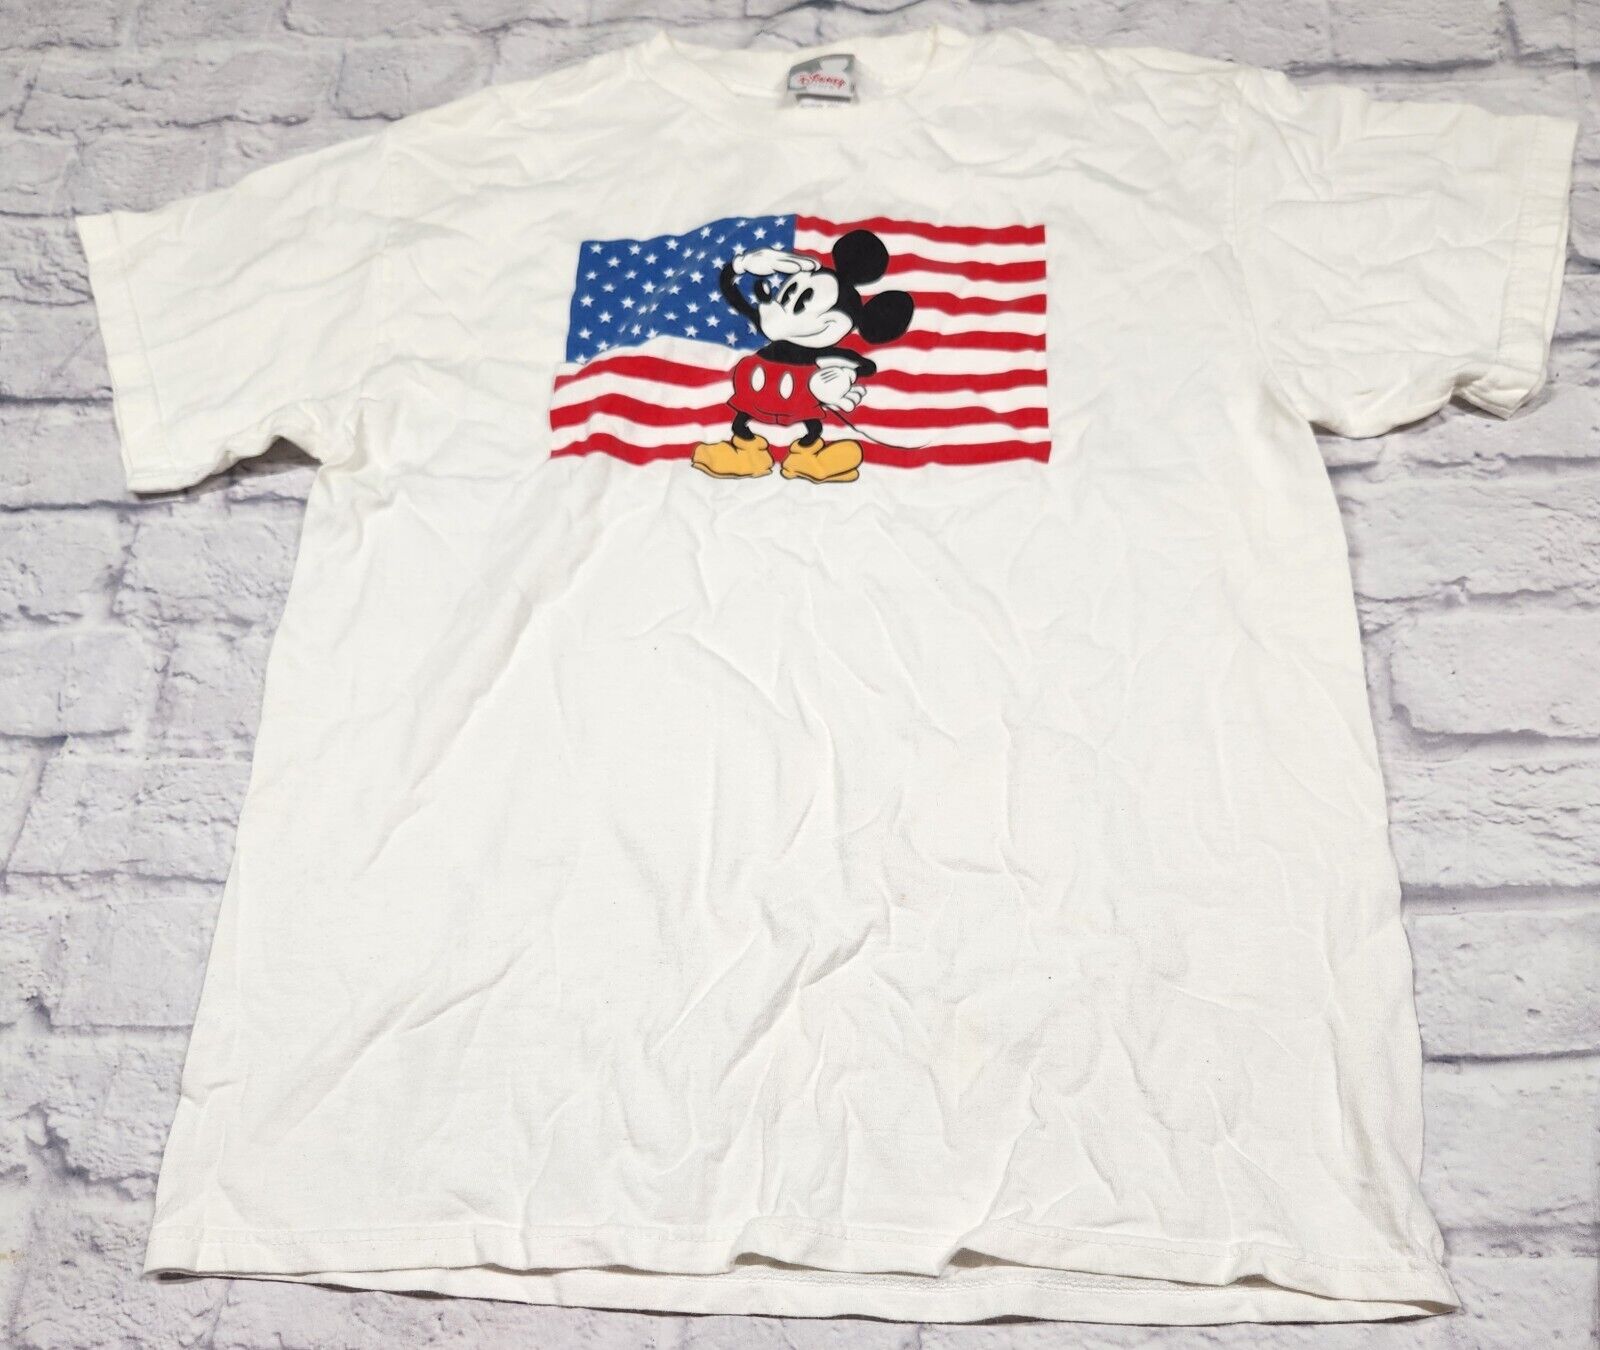 Vintage Disney Store Mickey Mouse American Flag Shirt Size L